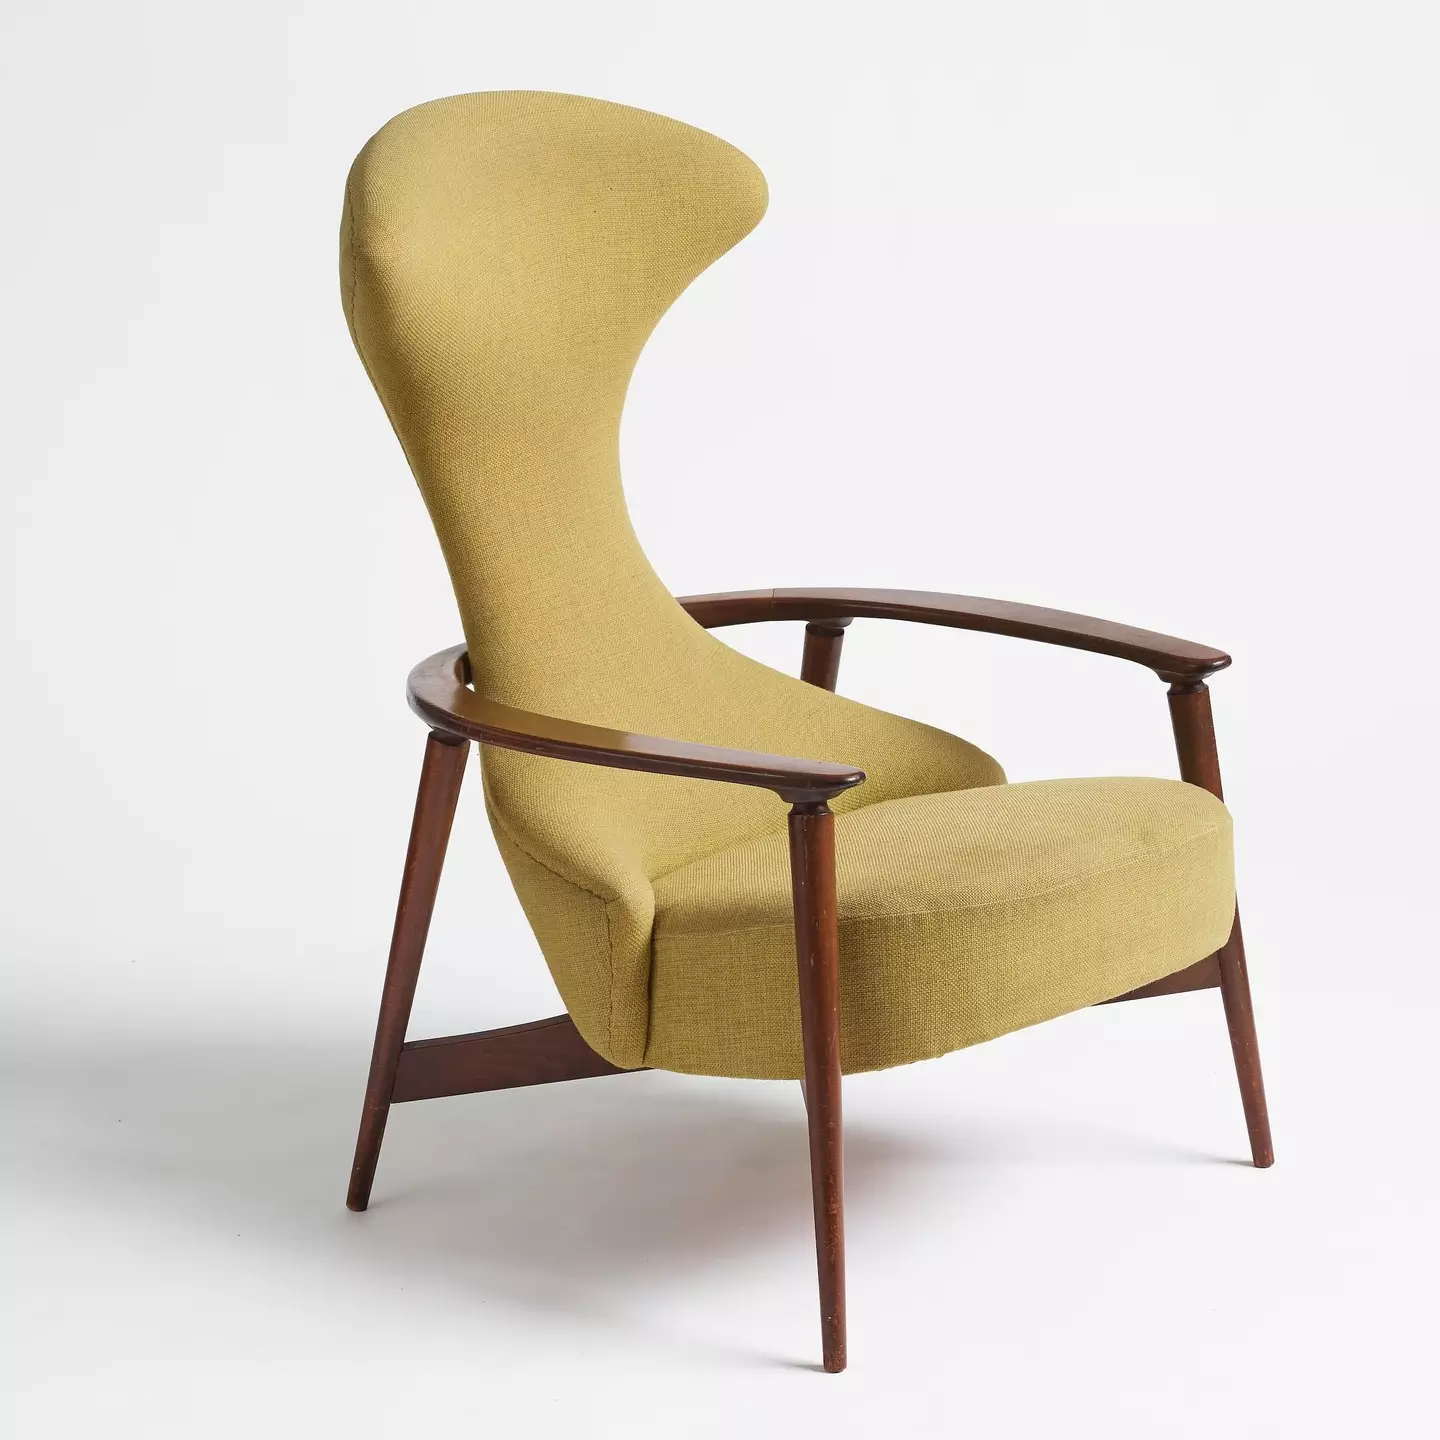 The Cavelli armchair sold for over £15,000 last week.